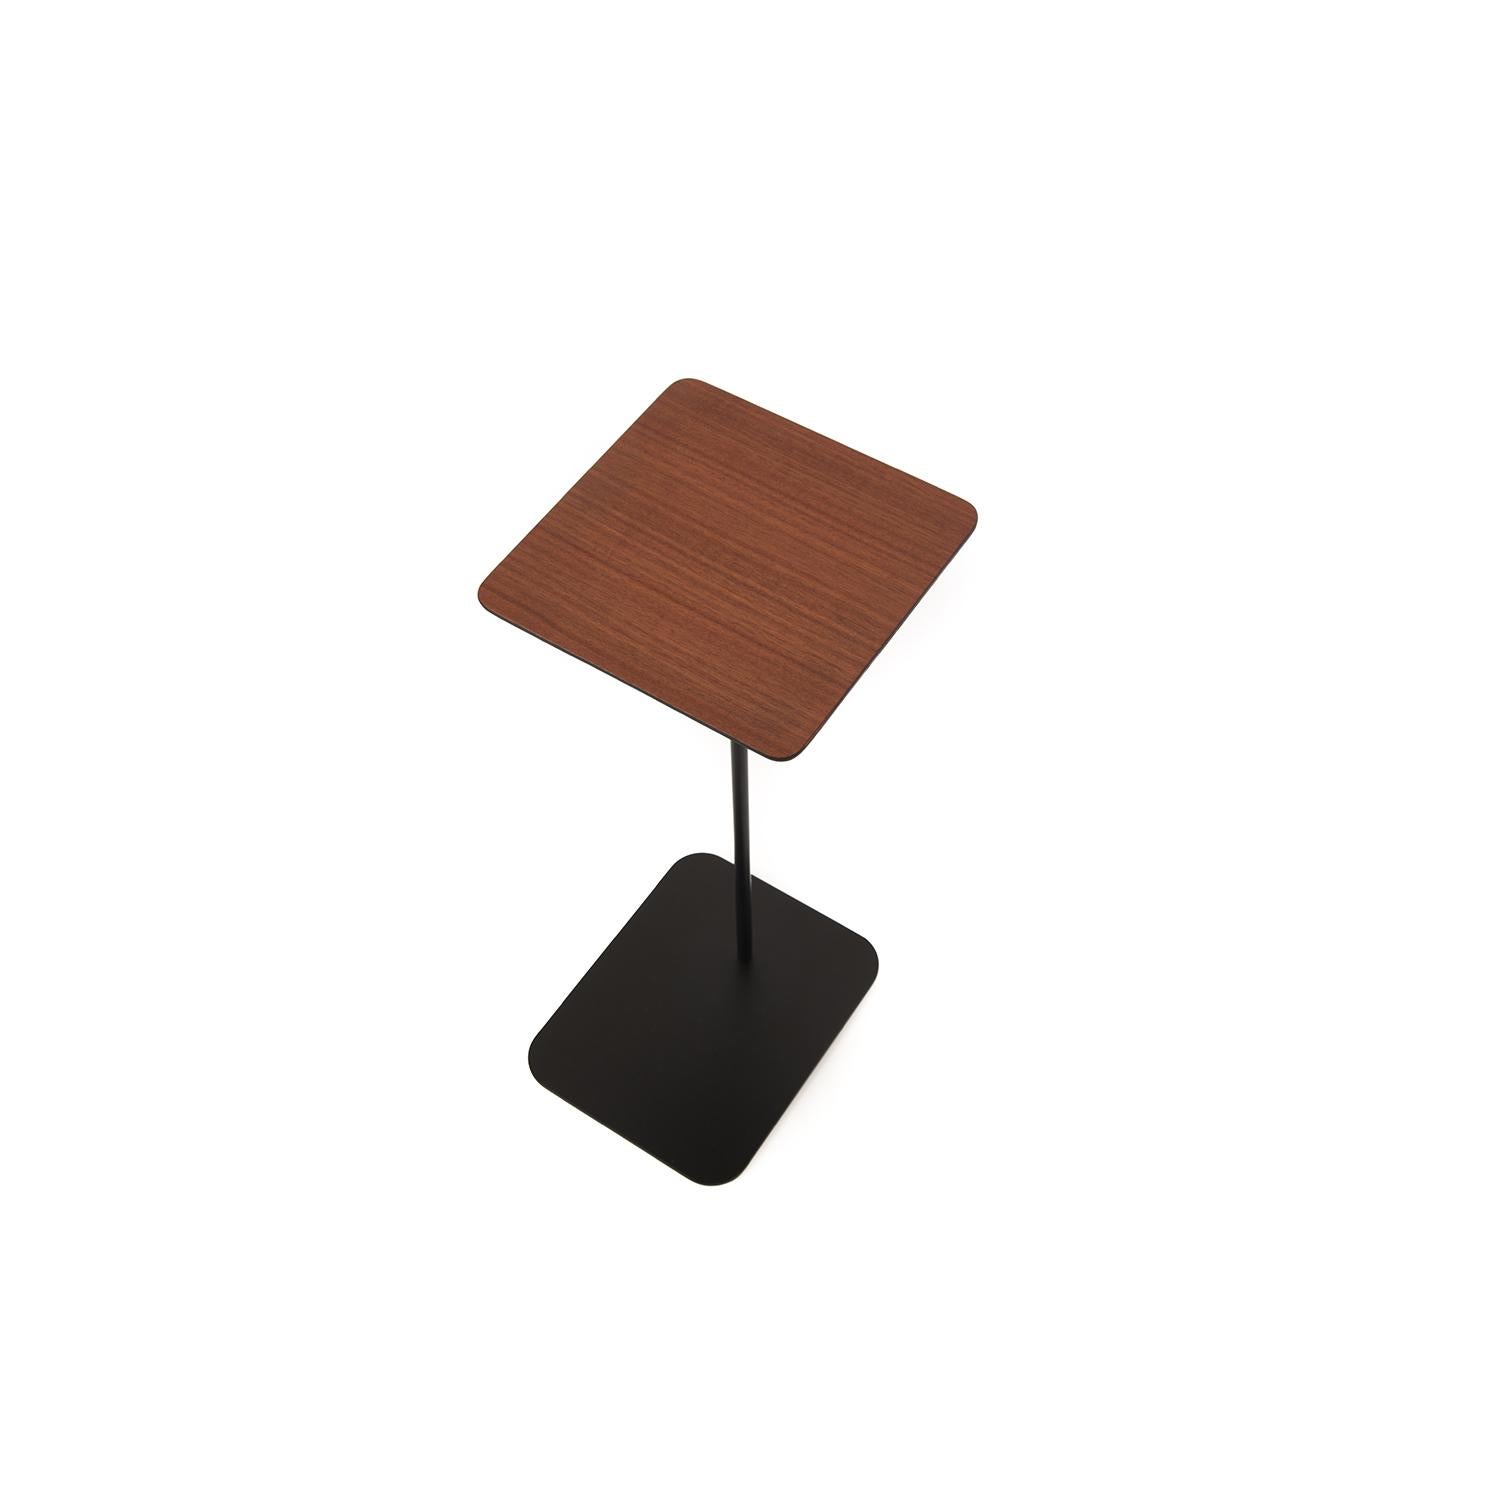 This square top makore wood table sits upon a slender, black stem with rectangular a base.